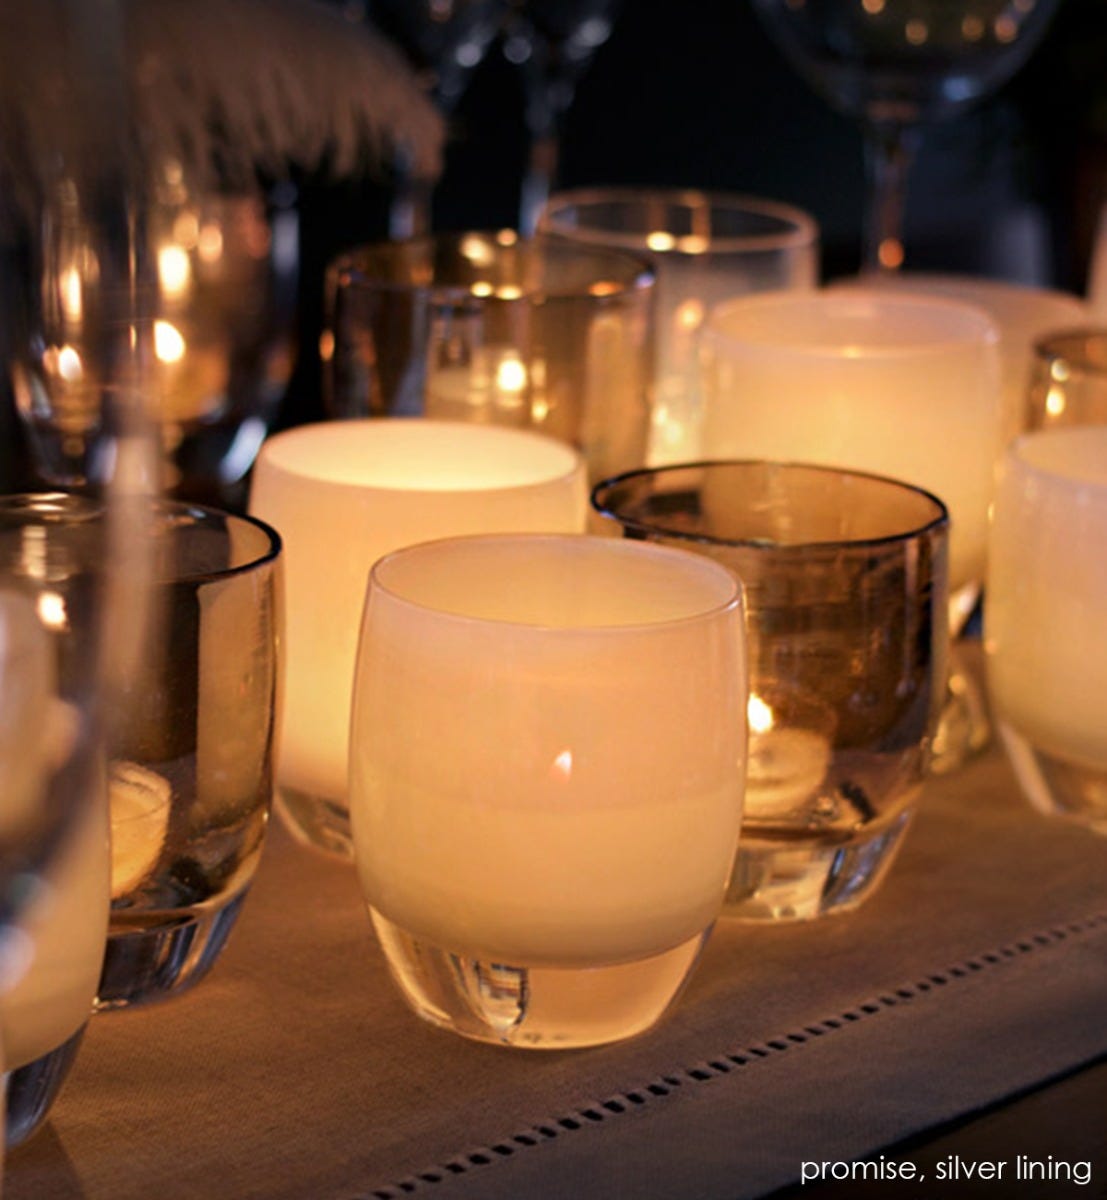 promise cream hand-blown glass votive candle holder. Paired with silver lining.